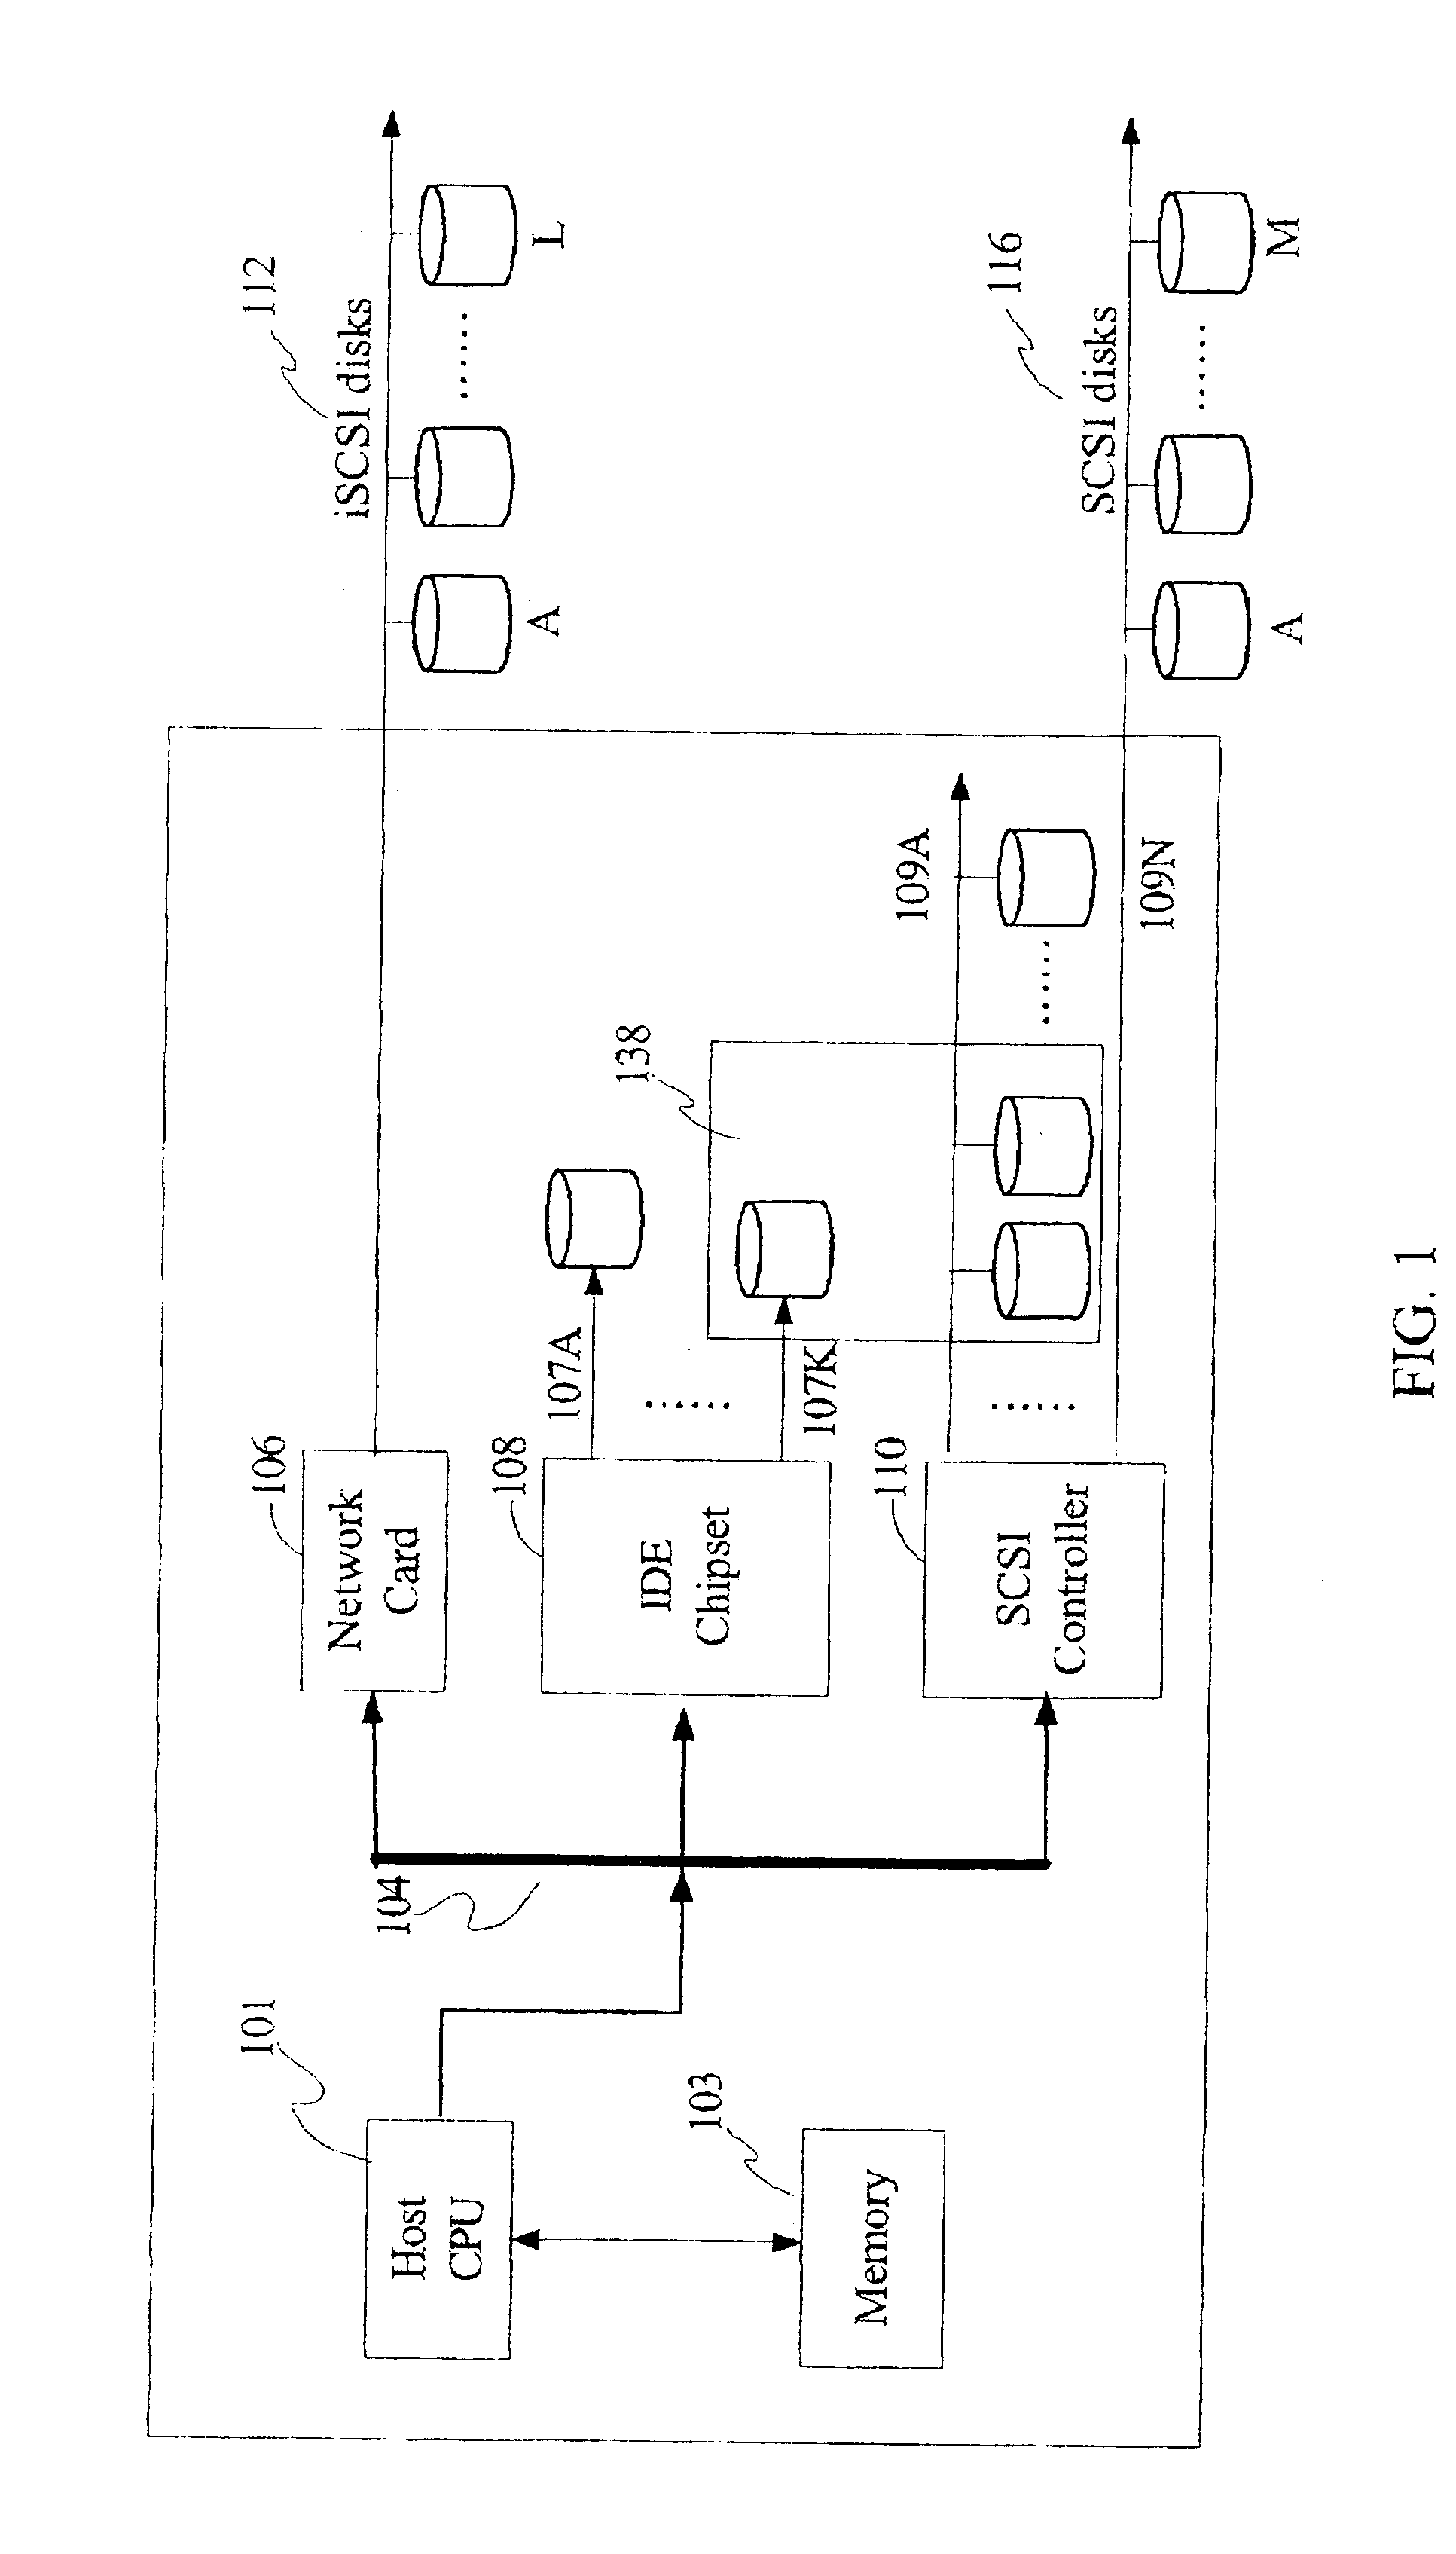 Method, system and apparatus for scanning newly added disk drives and automatically updating RAID configuration and rebuilding RAID data